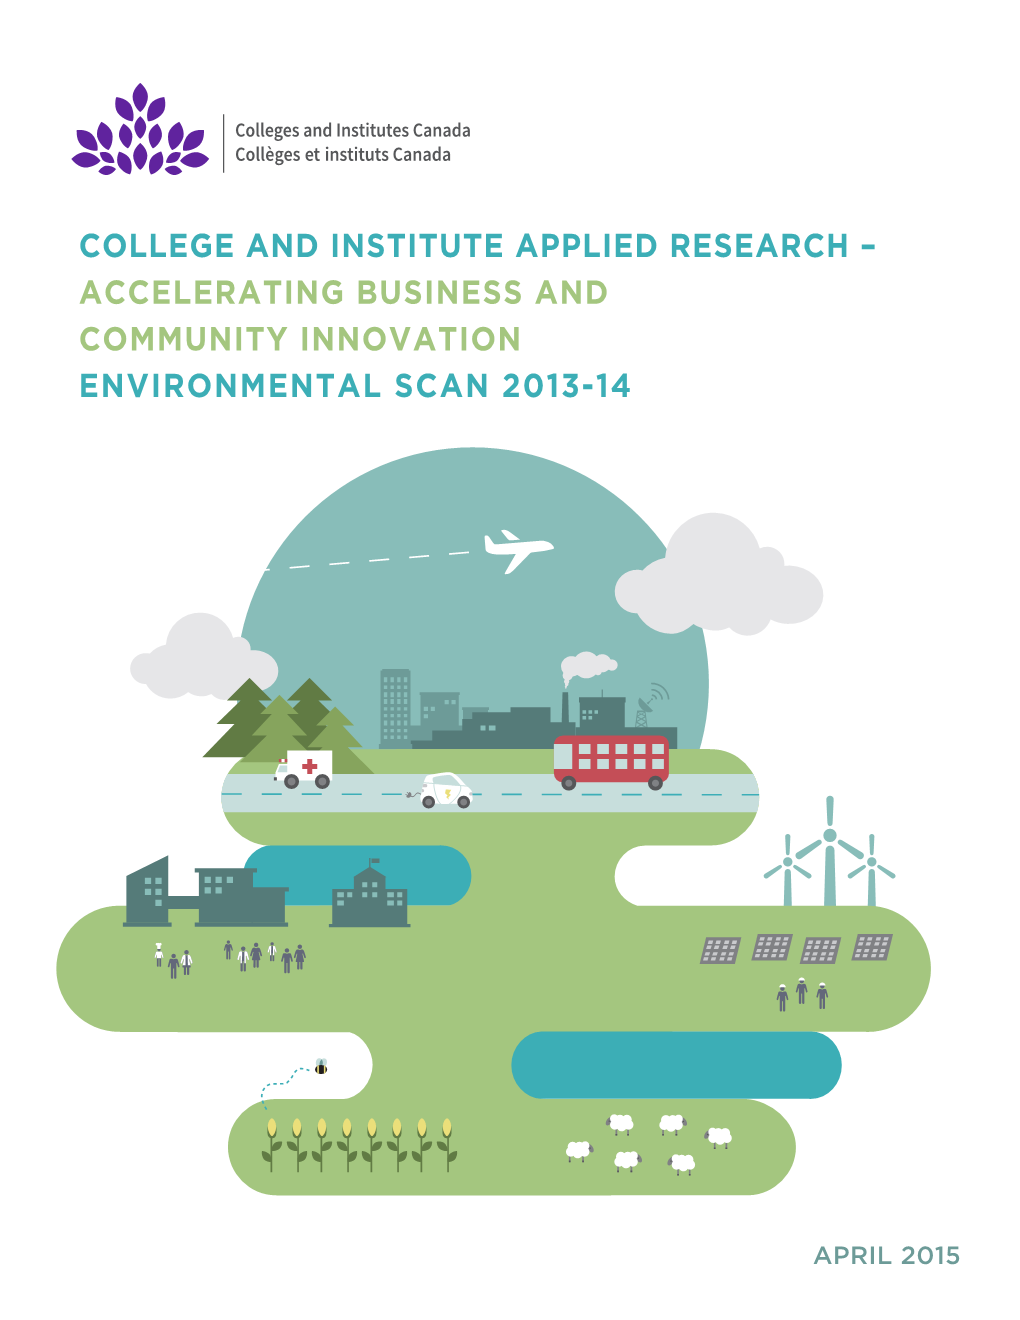 Accelerating Business and Community Innovation Environmental Scan 2013-14